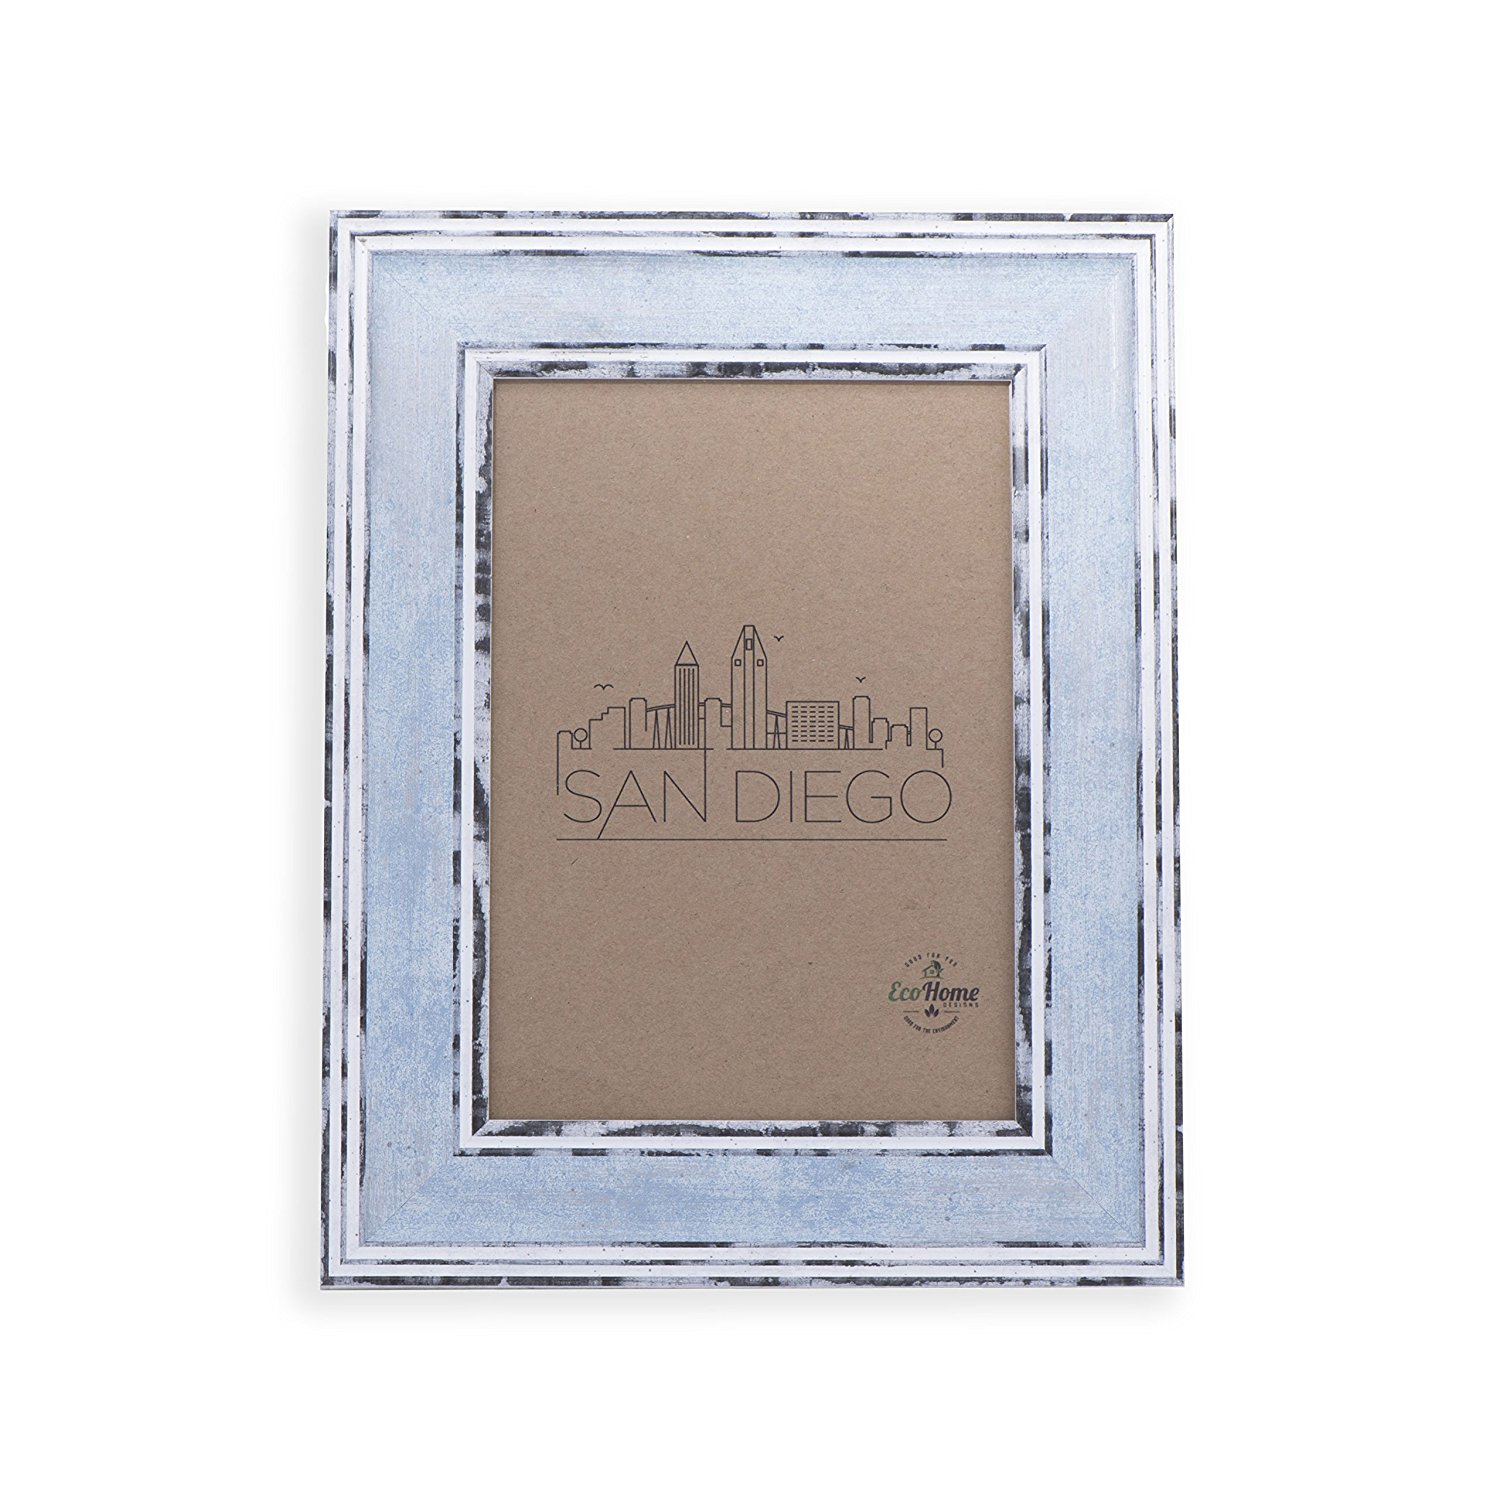 5x7 Picture Frame Distressed Blue - Mount / Desktop Display, Frames by EcoHome